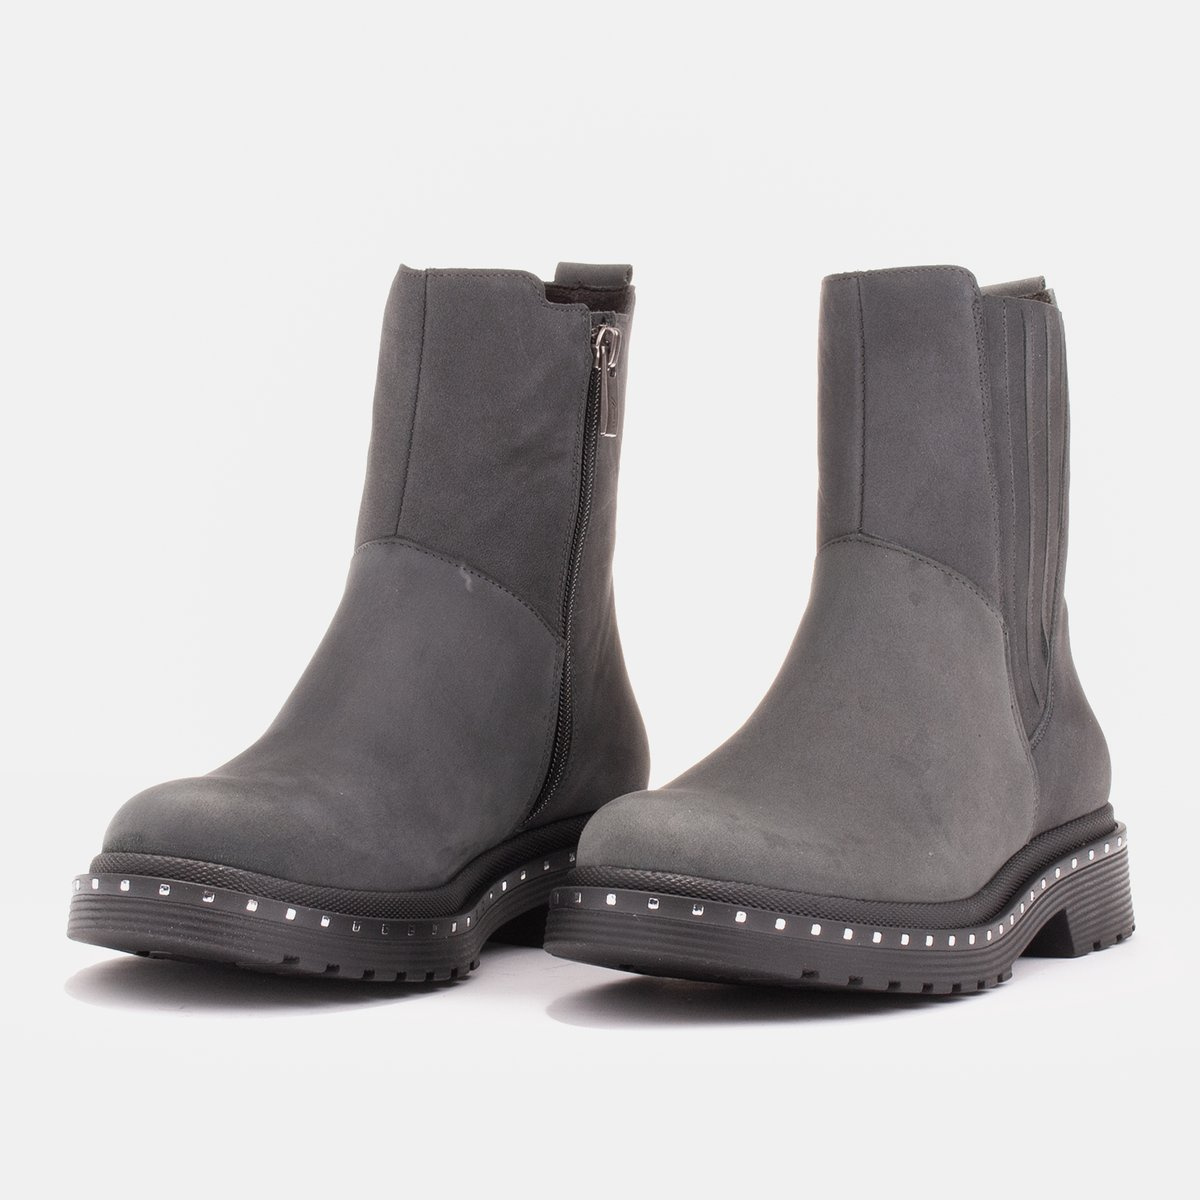 Costanza boots with silver studs